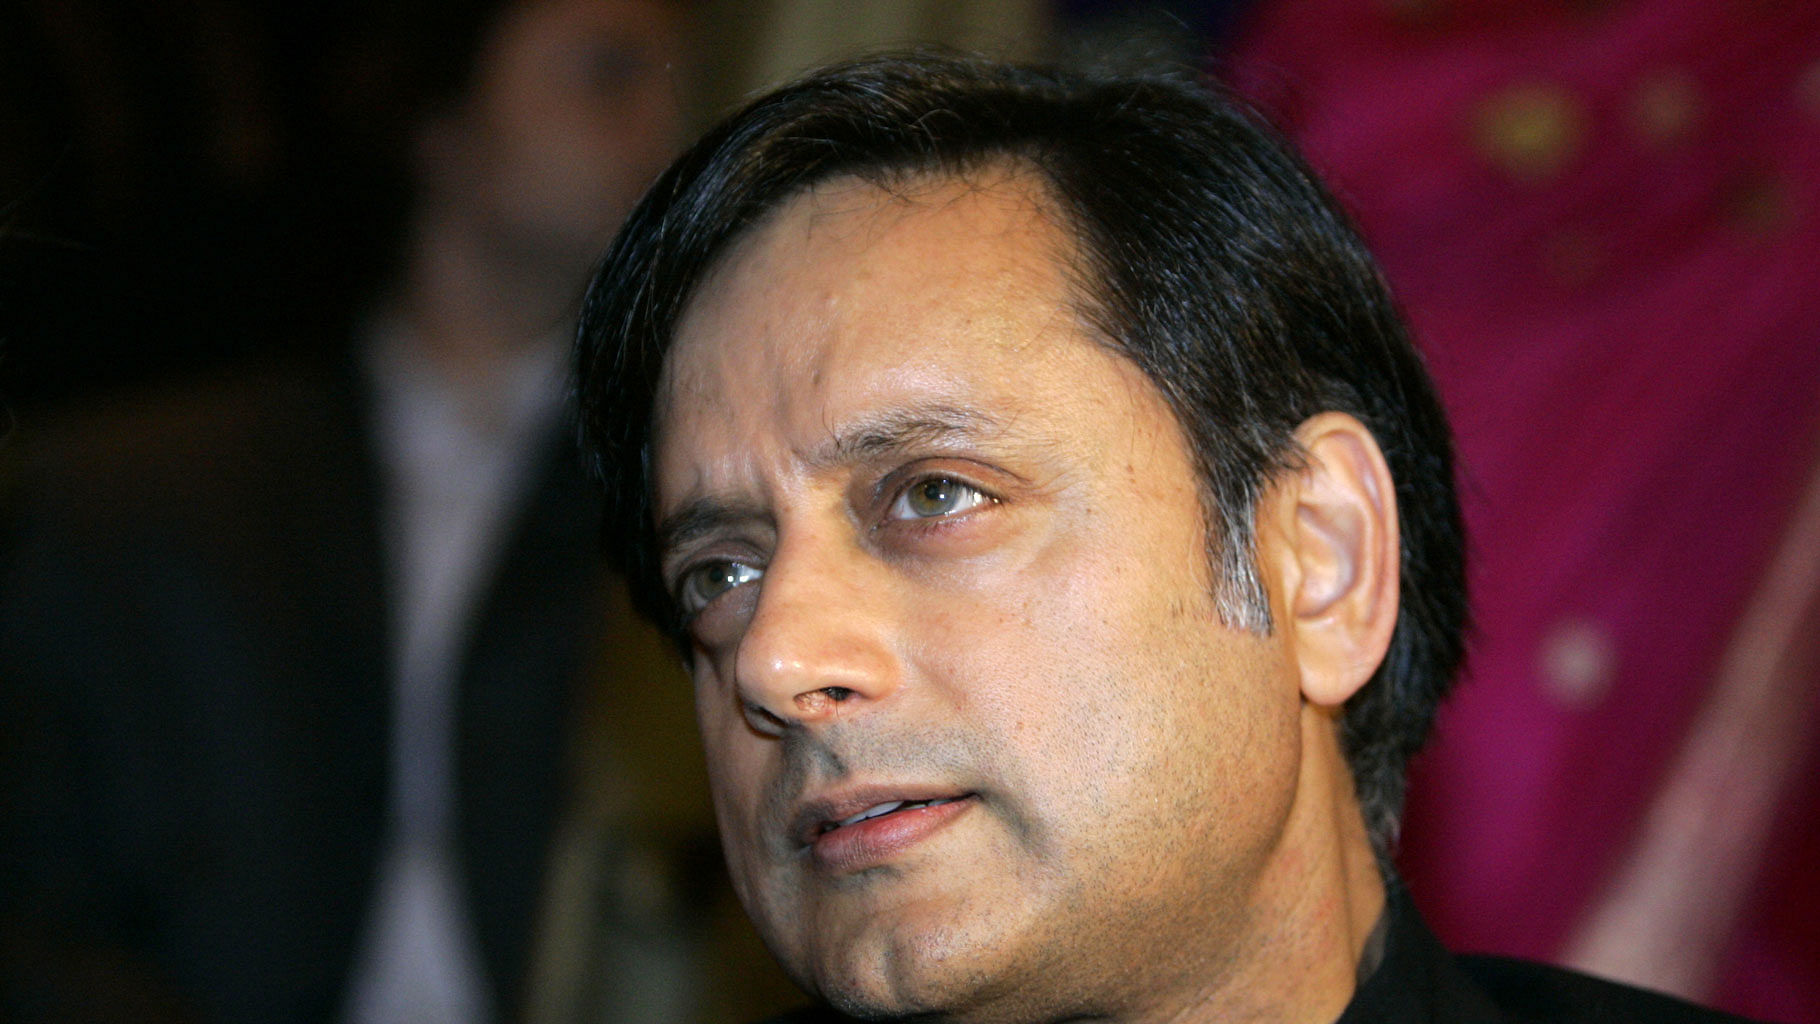 Congress leader Shashi Tharoor gave a rousing speech on nationalism in the JNU campus on Sunday. (File photo: Reuters)